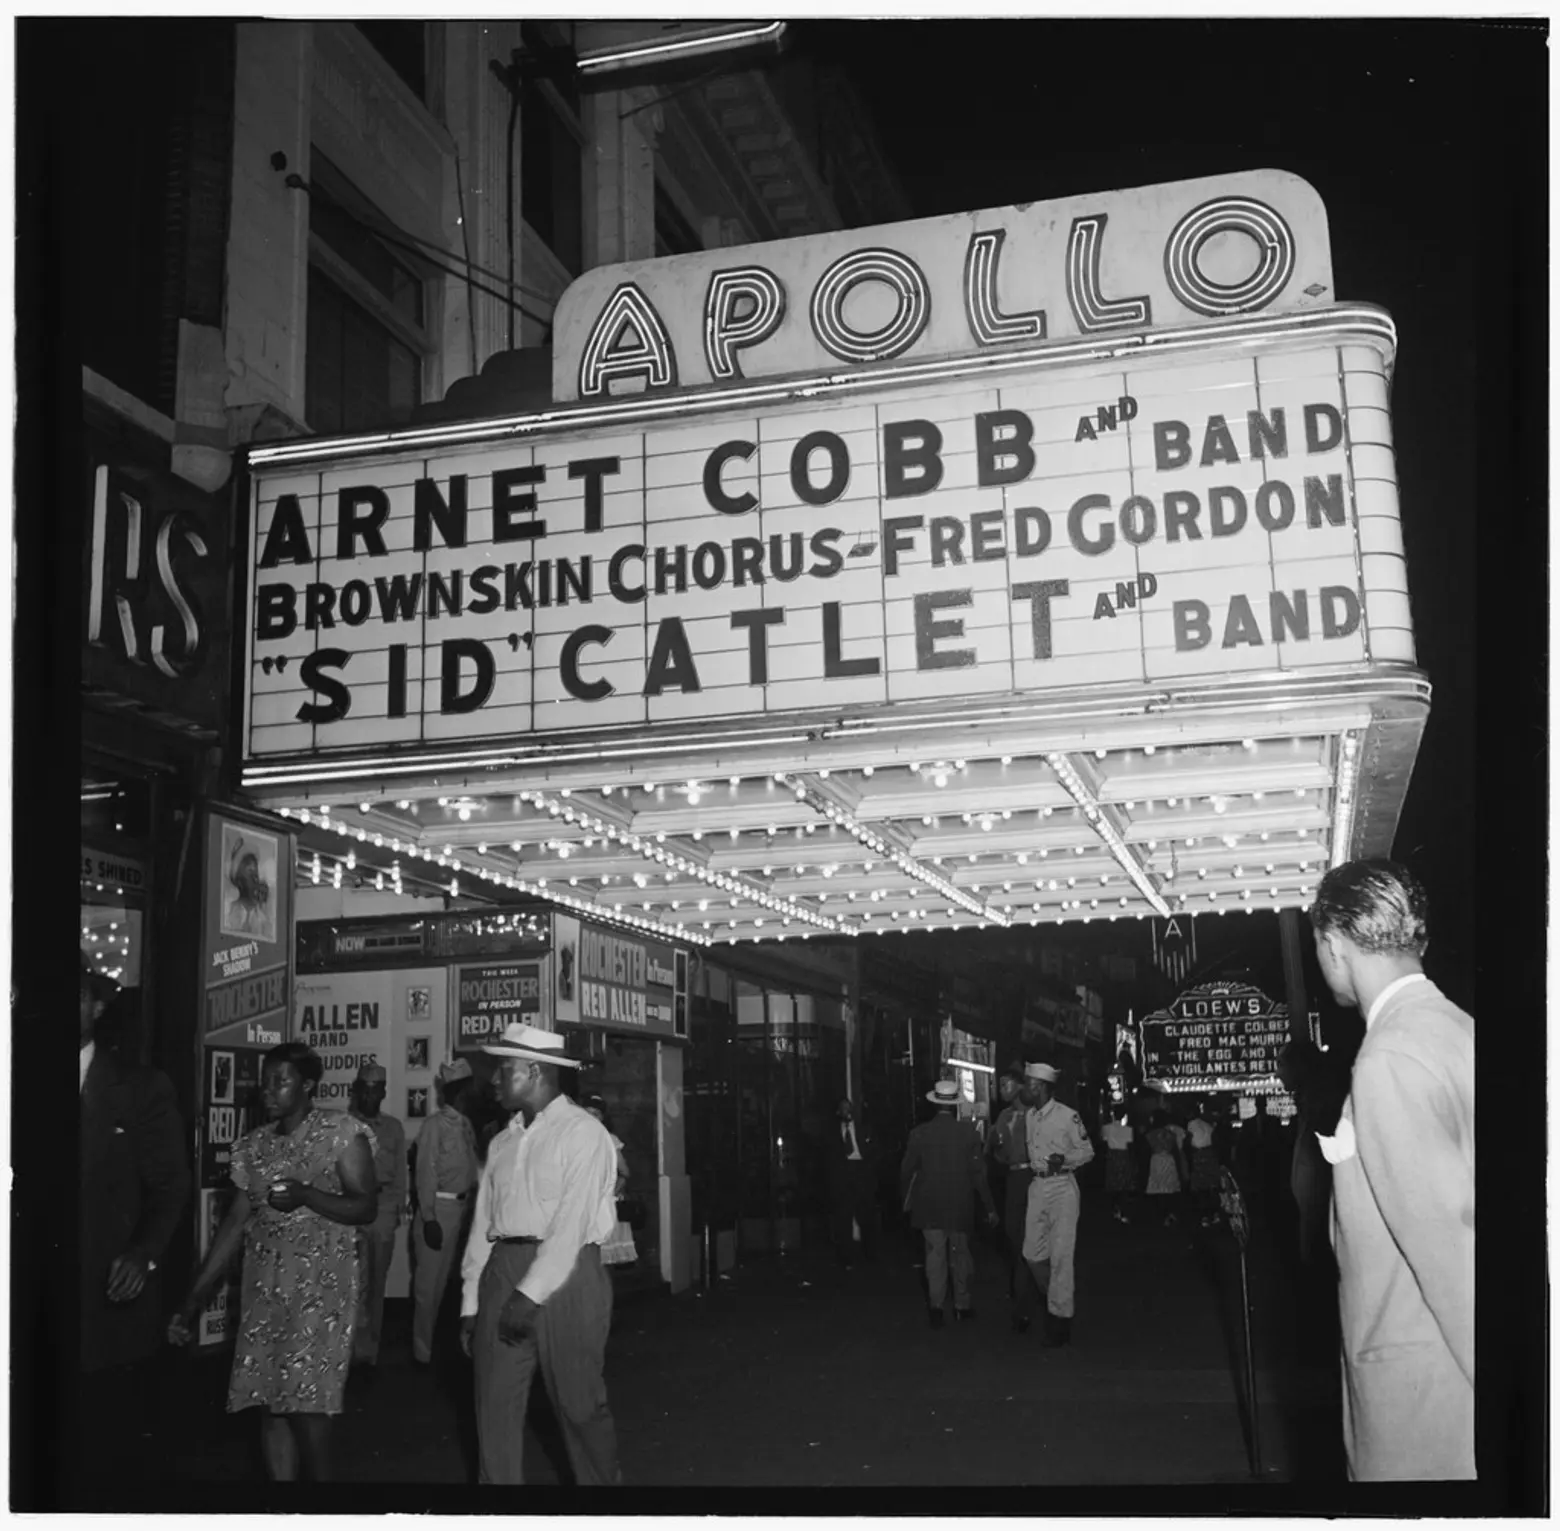 10 secrets of Harlem’s Apollo Theater: From burlesque beginnings to the ‘Godfather of Soul’